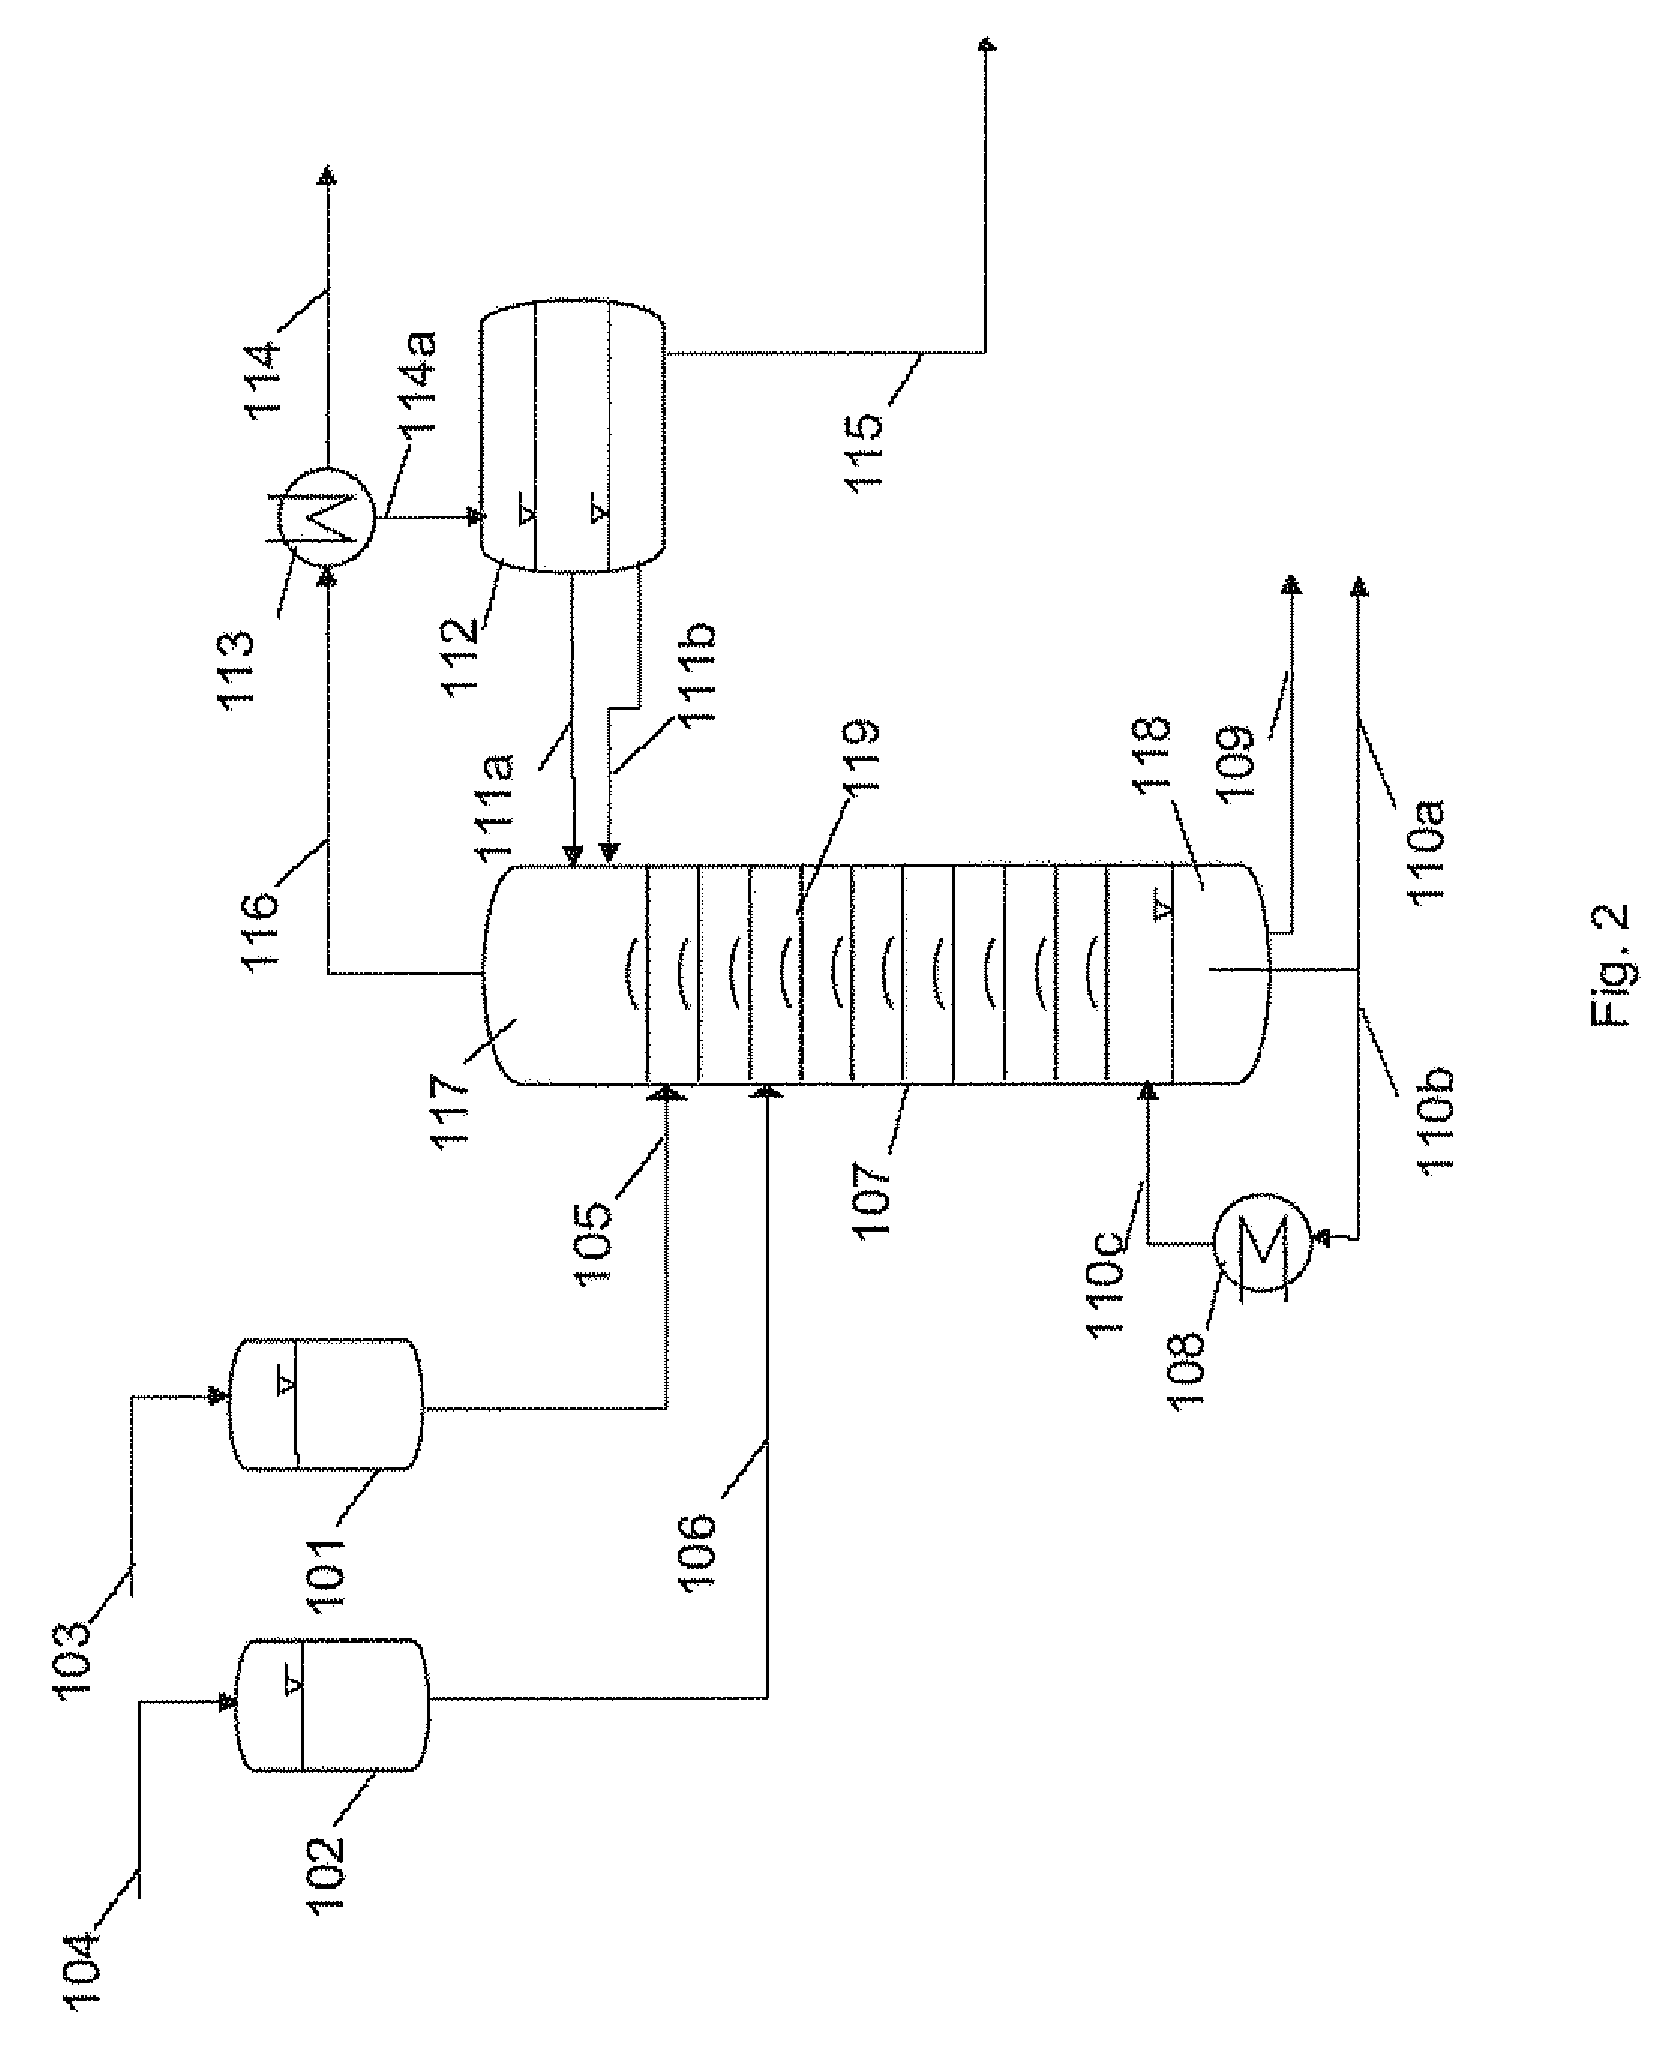 Method of producing a carboxylic alkyl ester